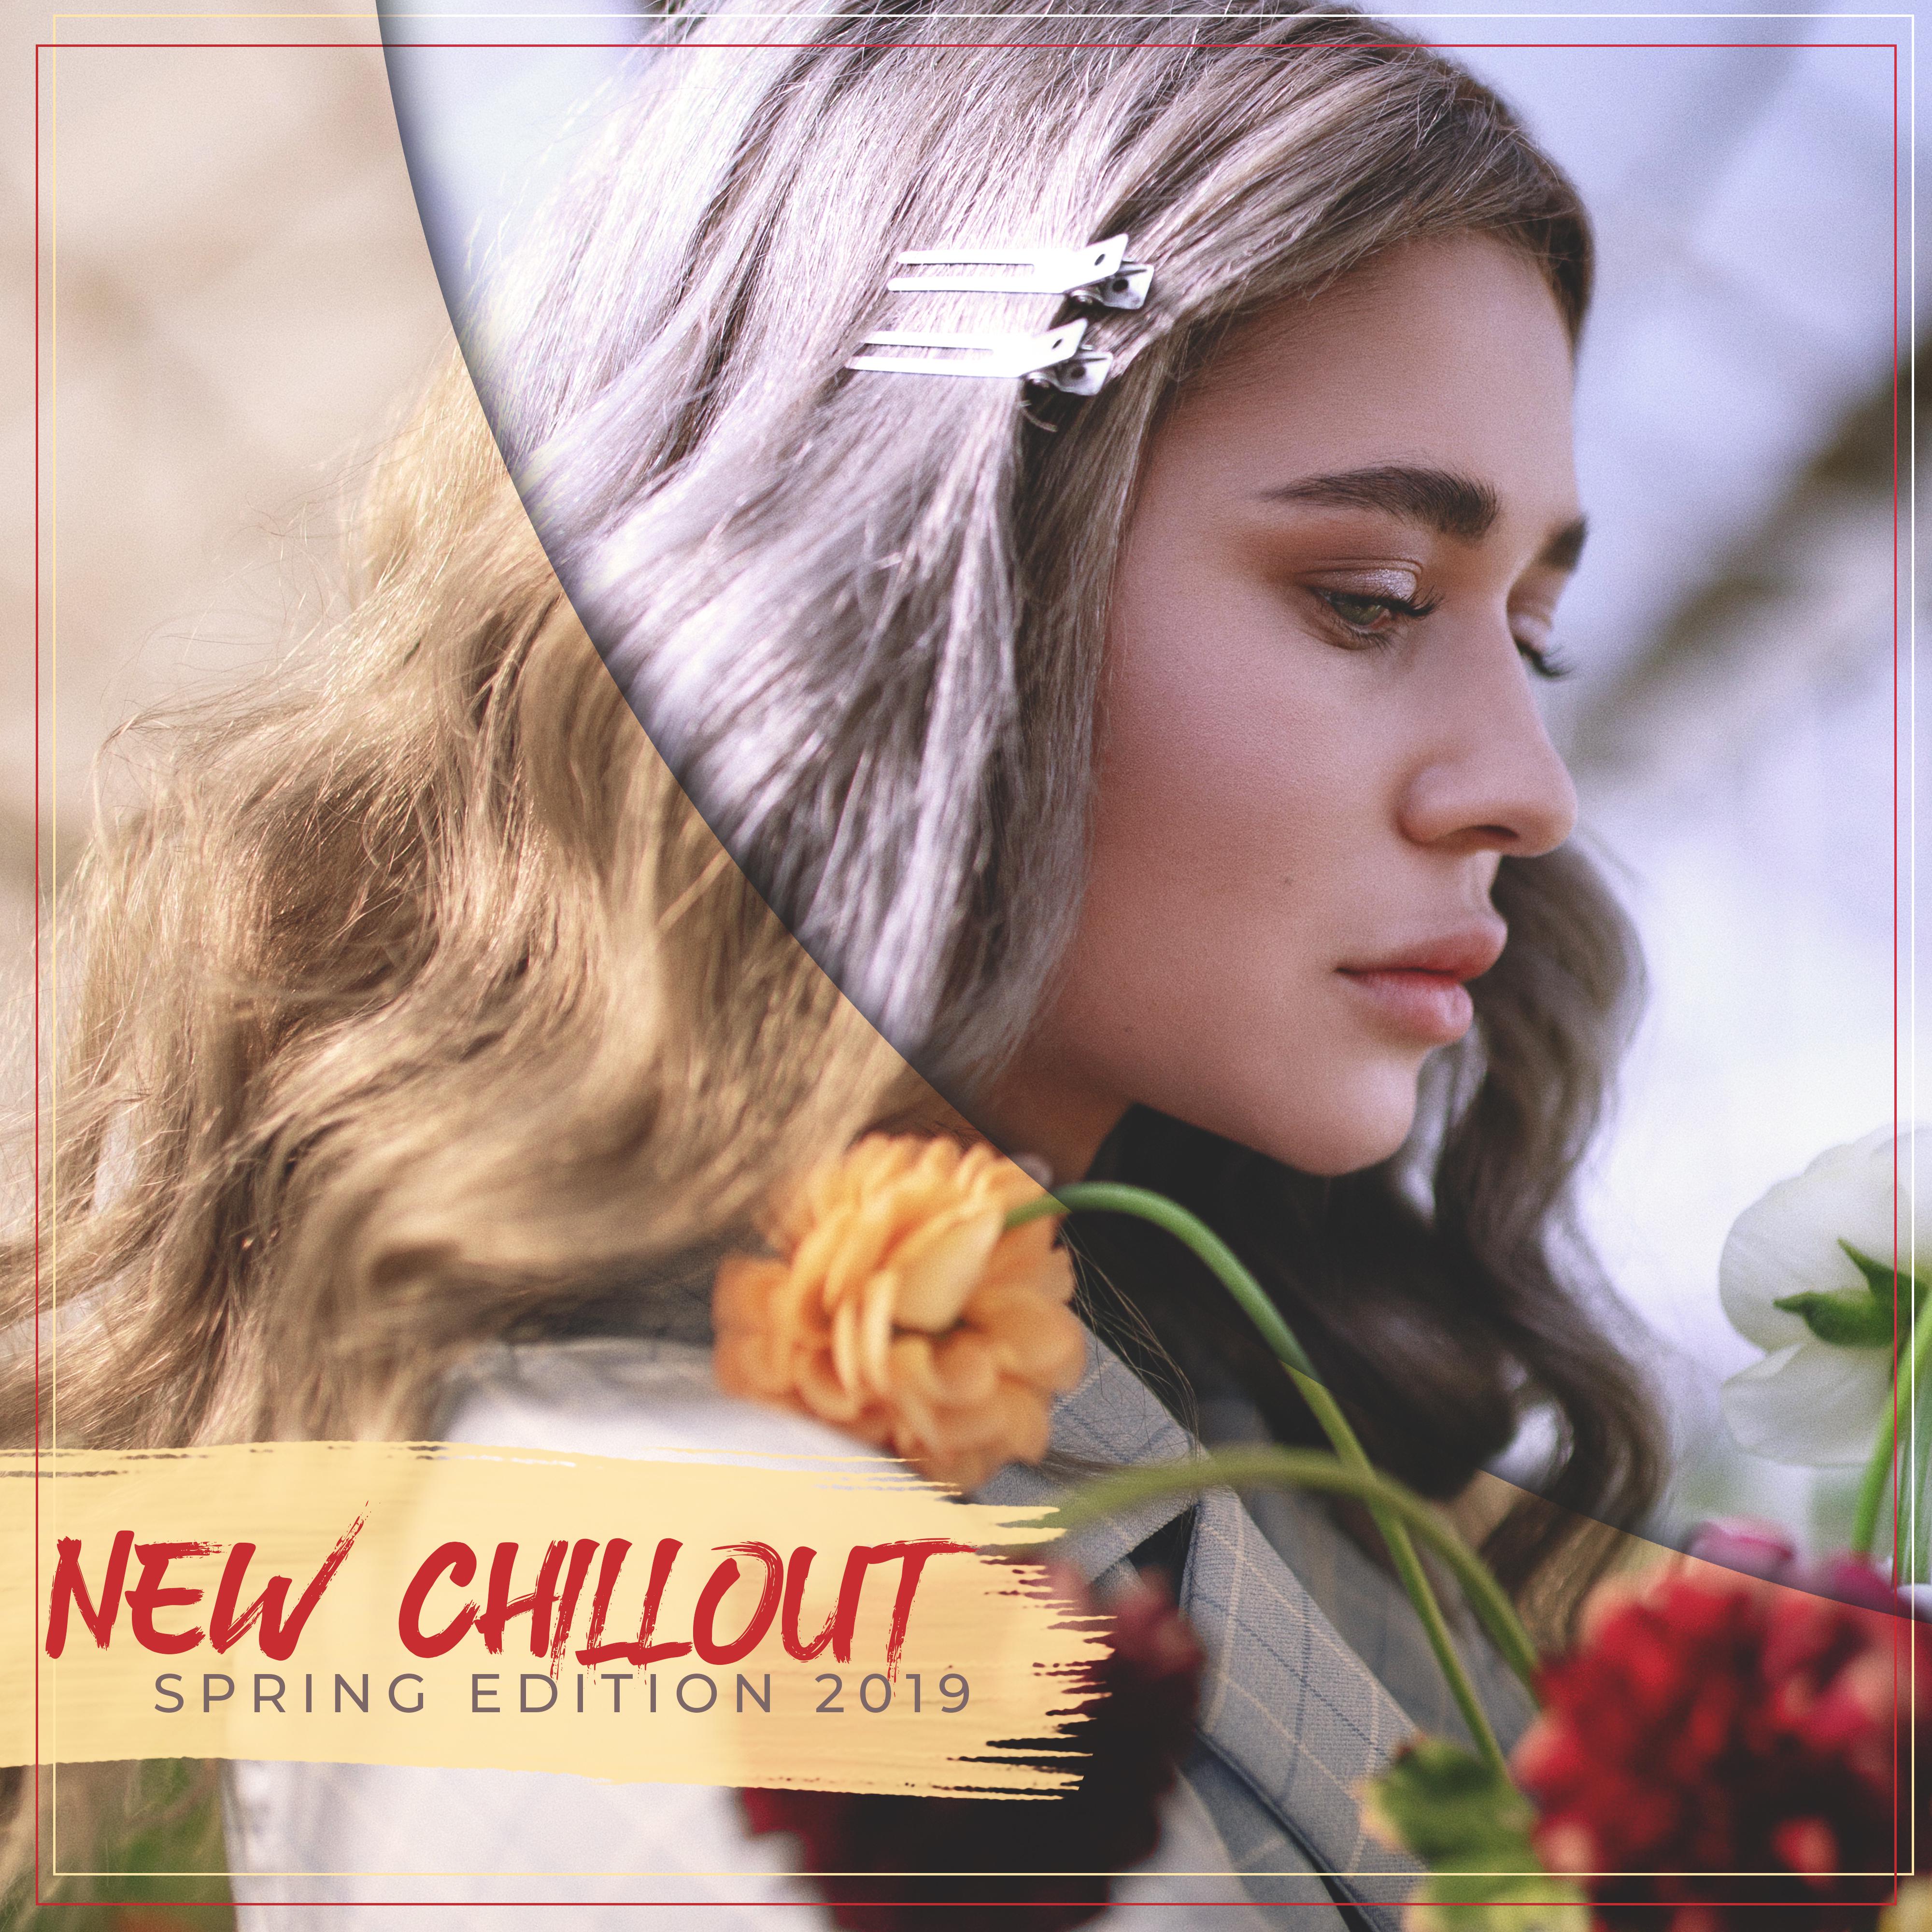 New Chillout Spring Edition 2019